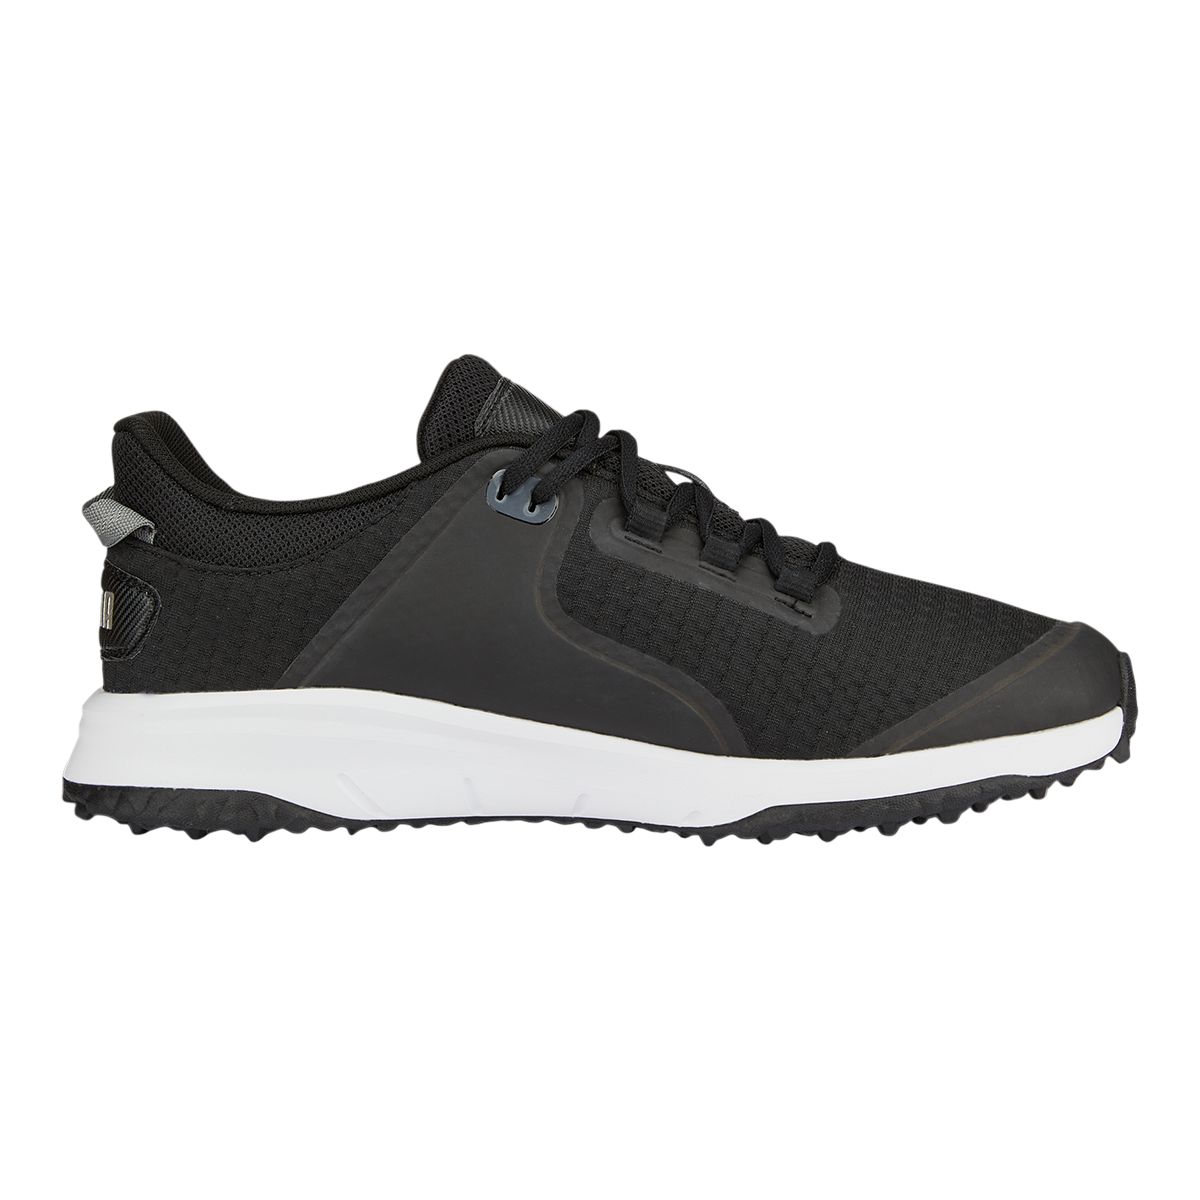 Image of Puma Men's Fusion Grip Spikeless Golf Shoes